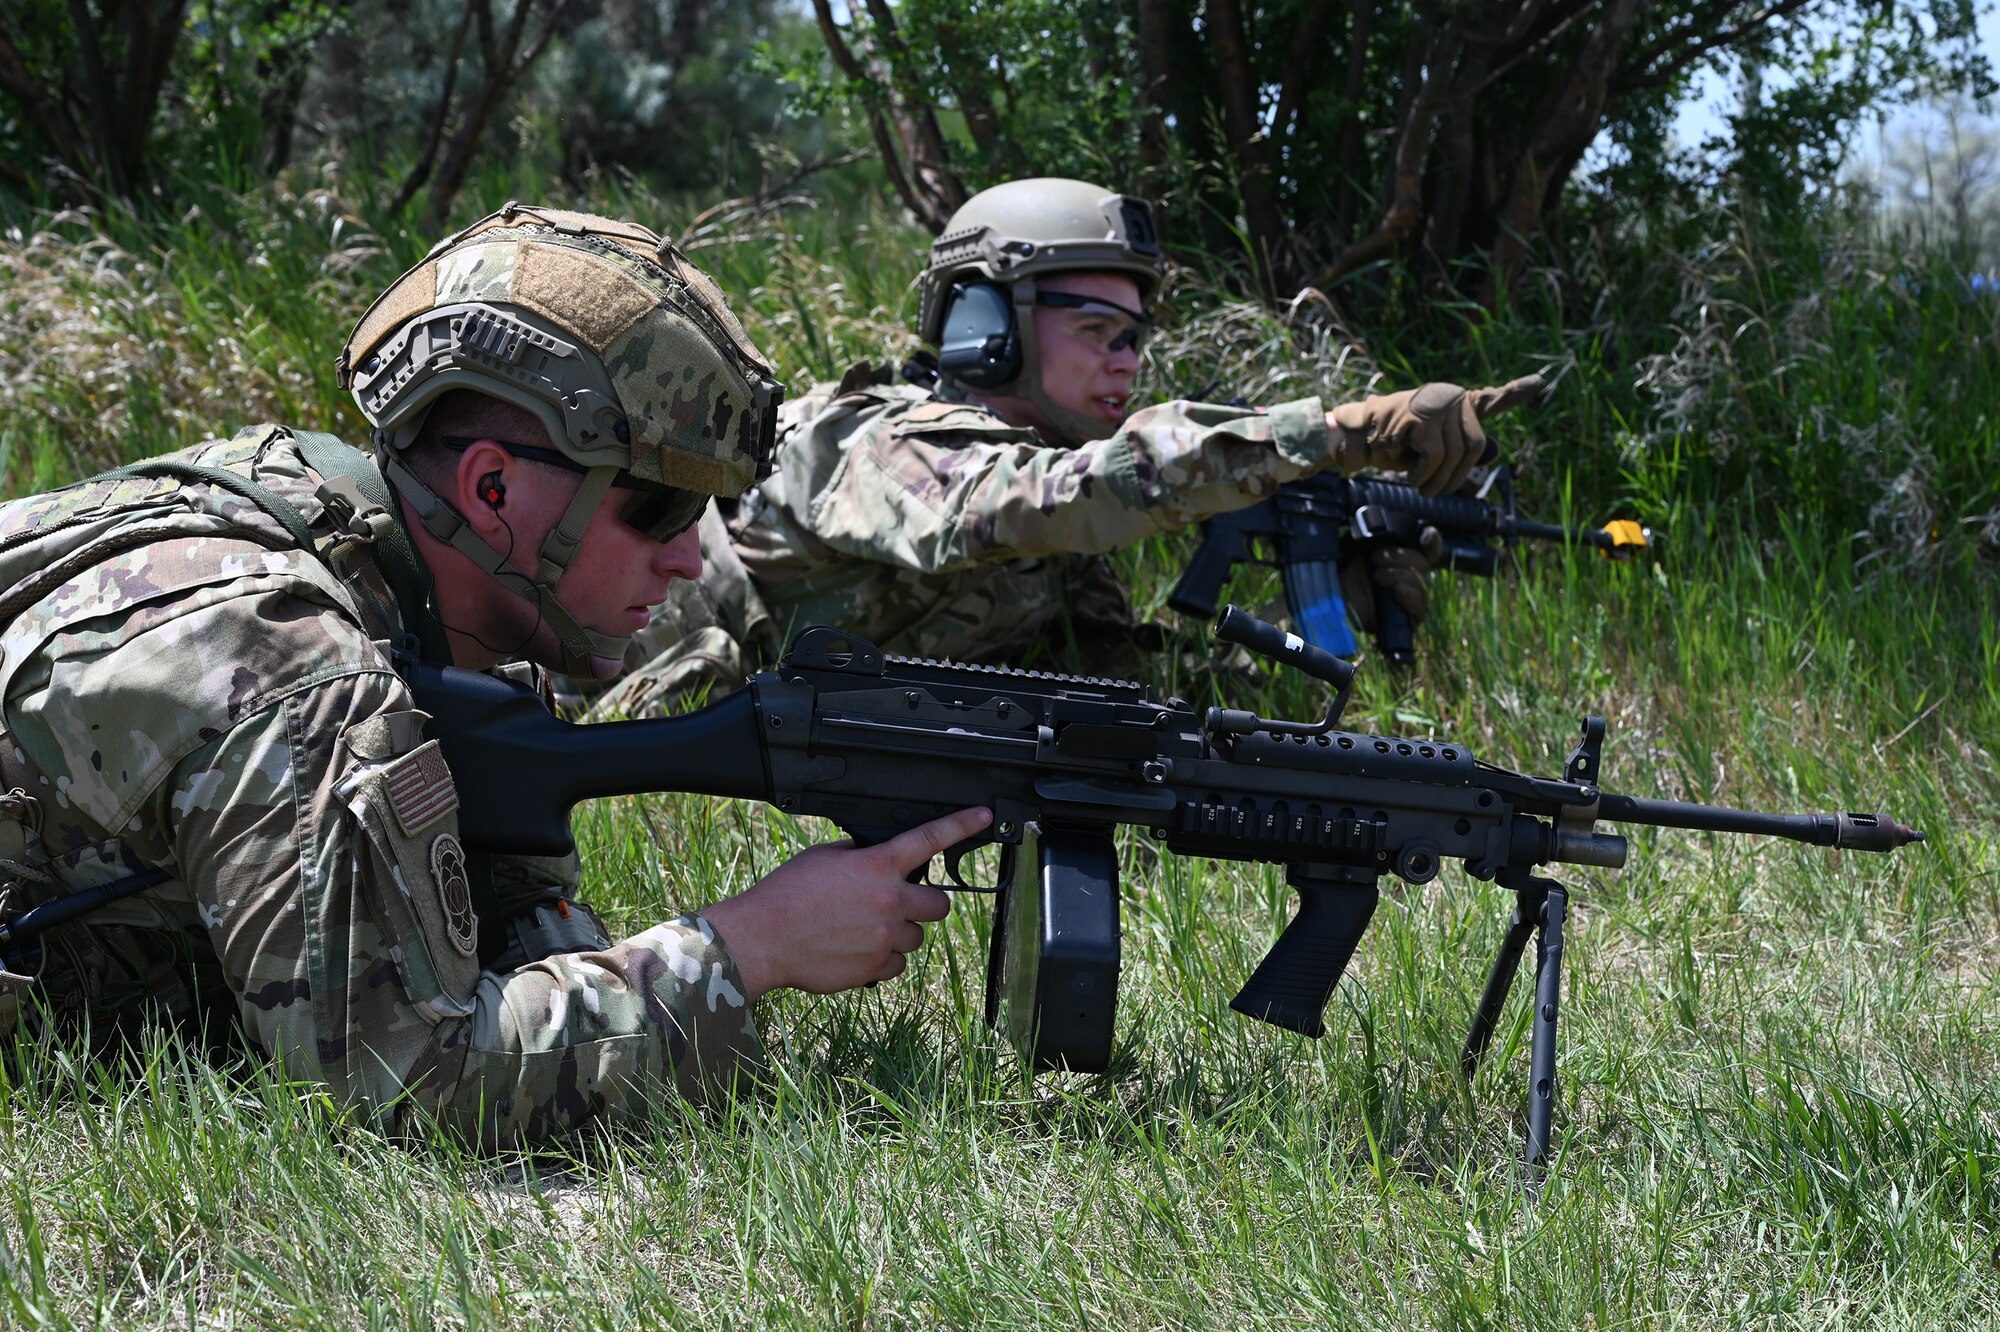 Two North Dakota Air National Guard 219th Security Forces Squadron members in military uniform with rifles modified for training lay on their stomachs during a training exercise at the Minot Air Force Base, N.D., June 24, 2021.